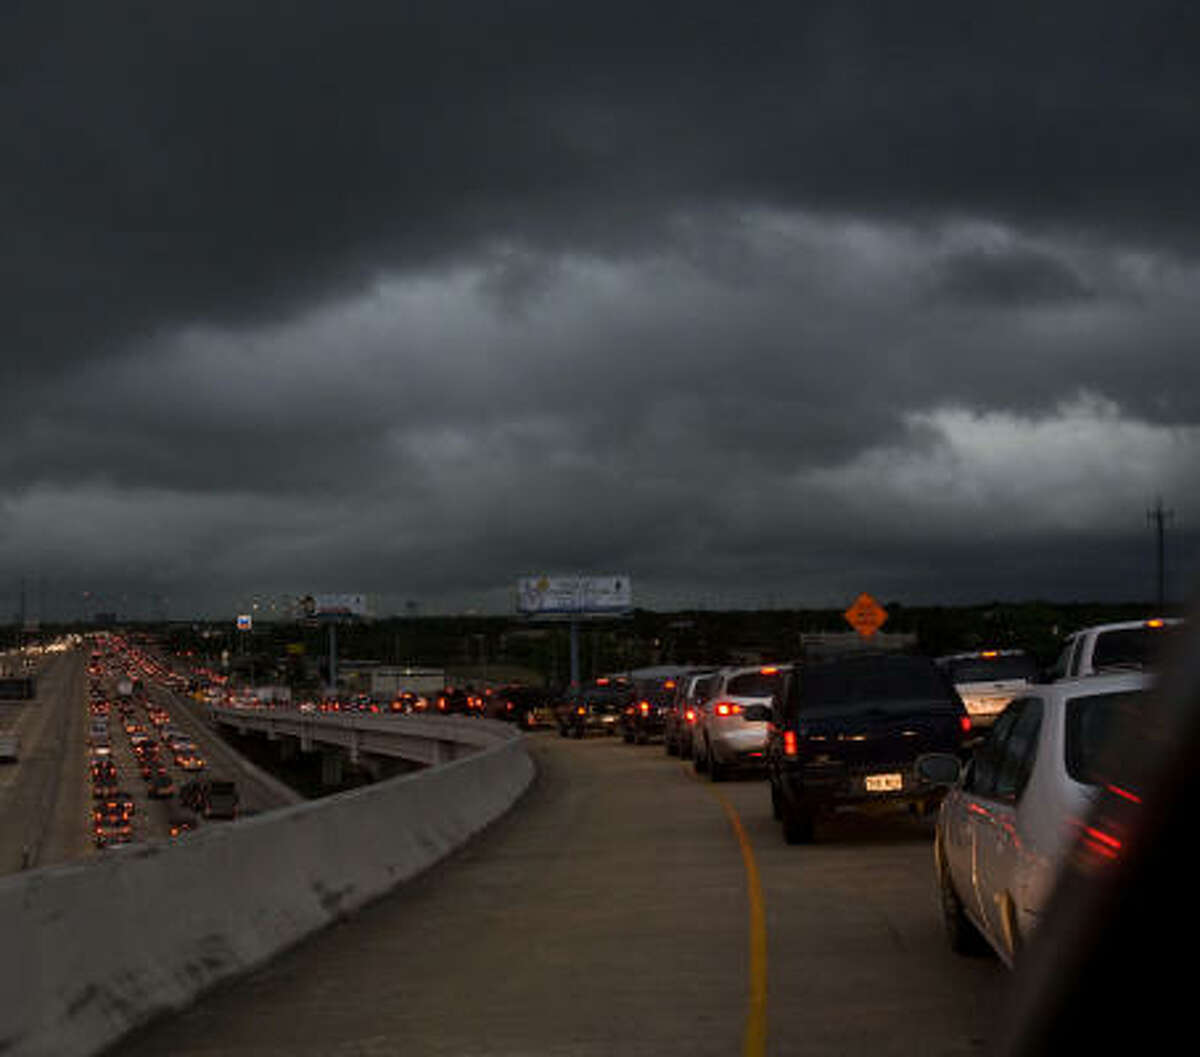 Traffic backs up on the Beltway 8 ramp to U.S. 290 northbound as a storm moves into the Houston area. There's also trouble ahead for Texas roads, lawmakers say.